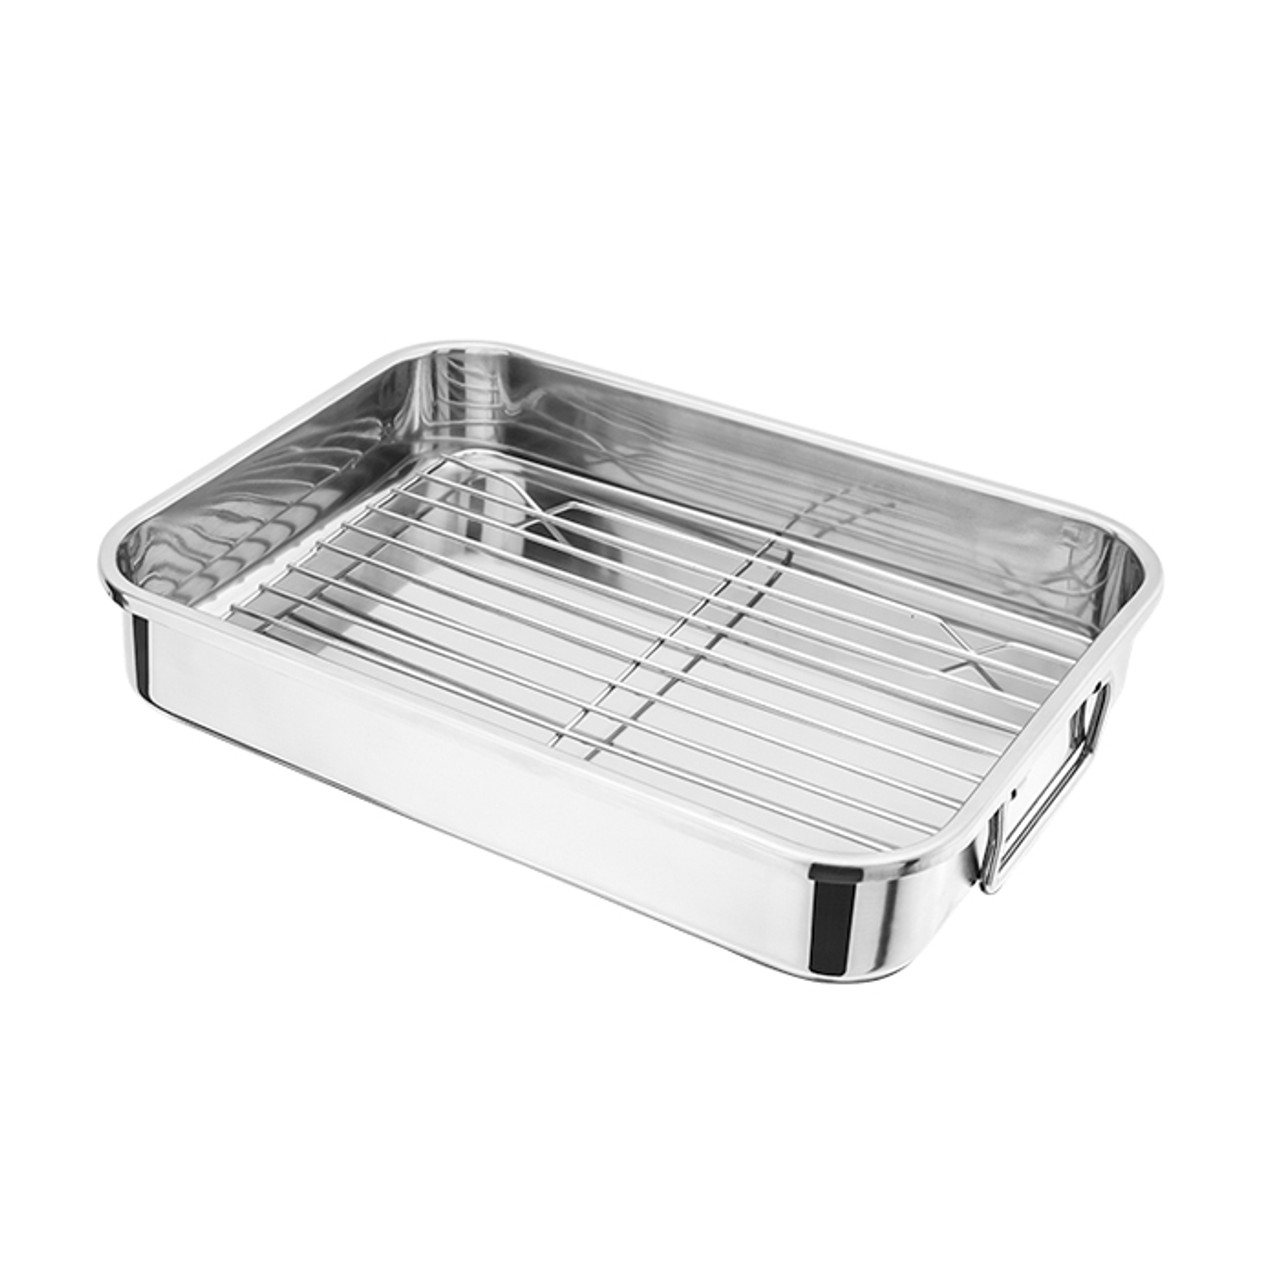 Speciality Cookware, 32 x 24 x 6cm Roasting Pan with Rack